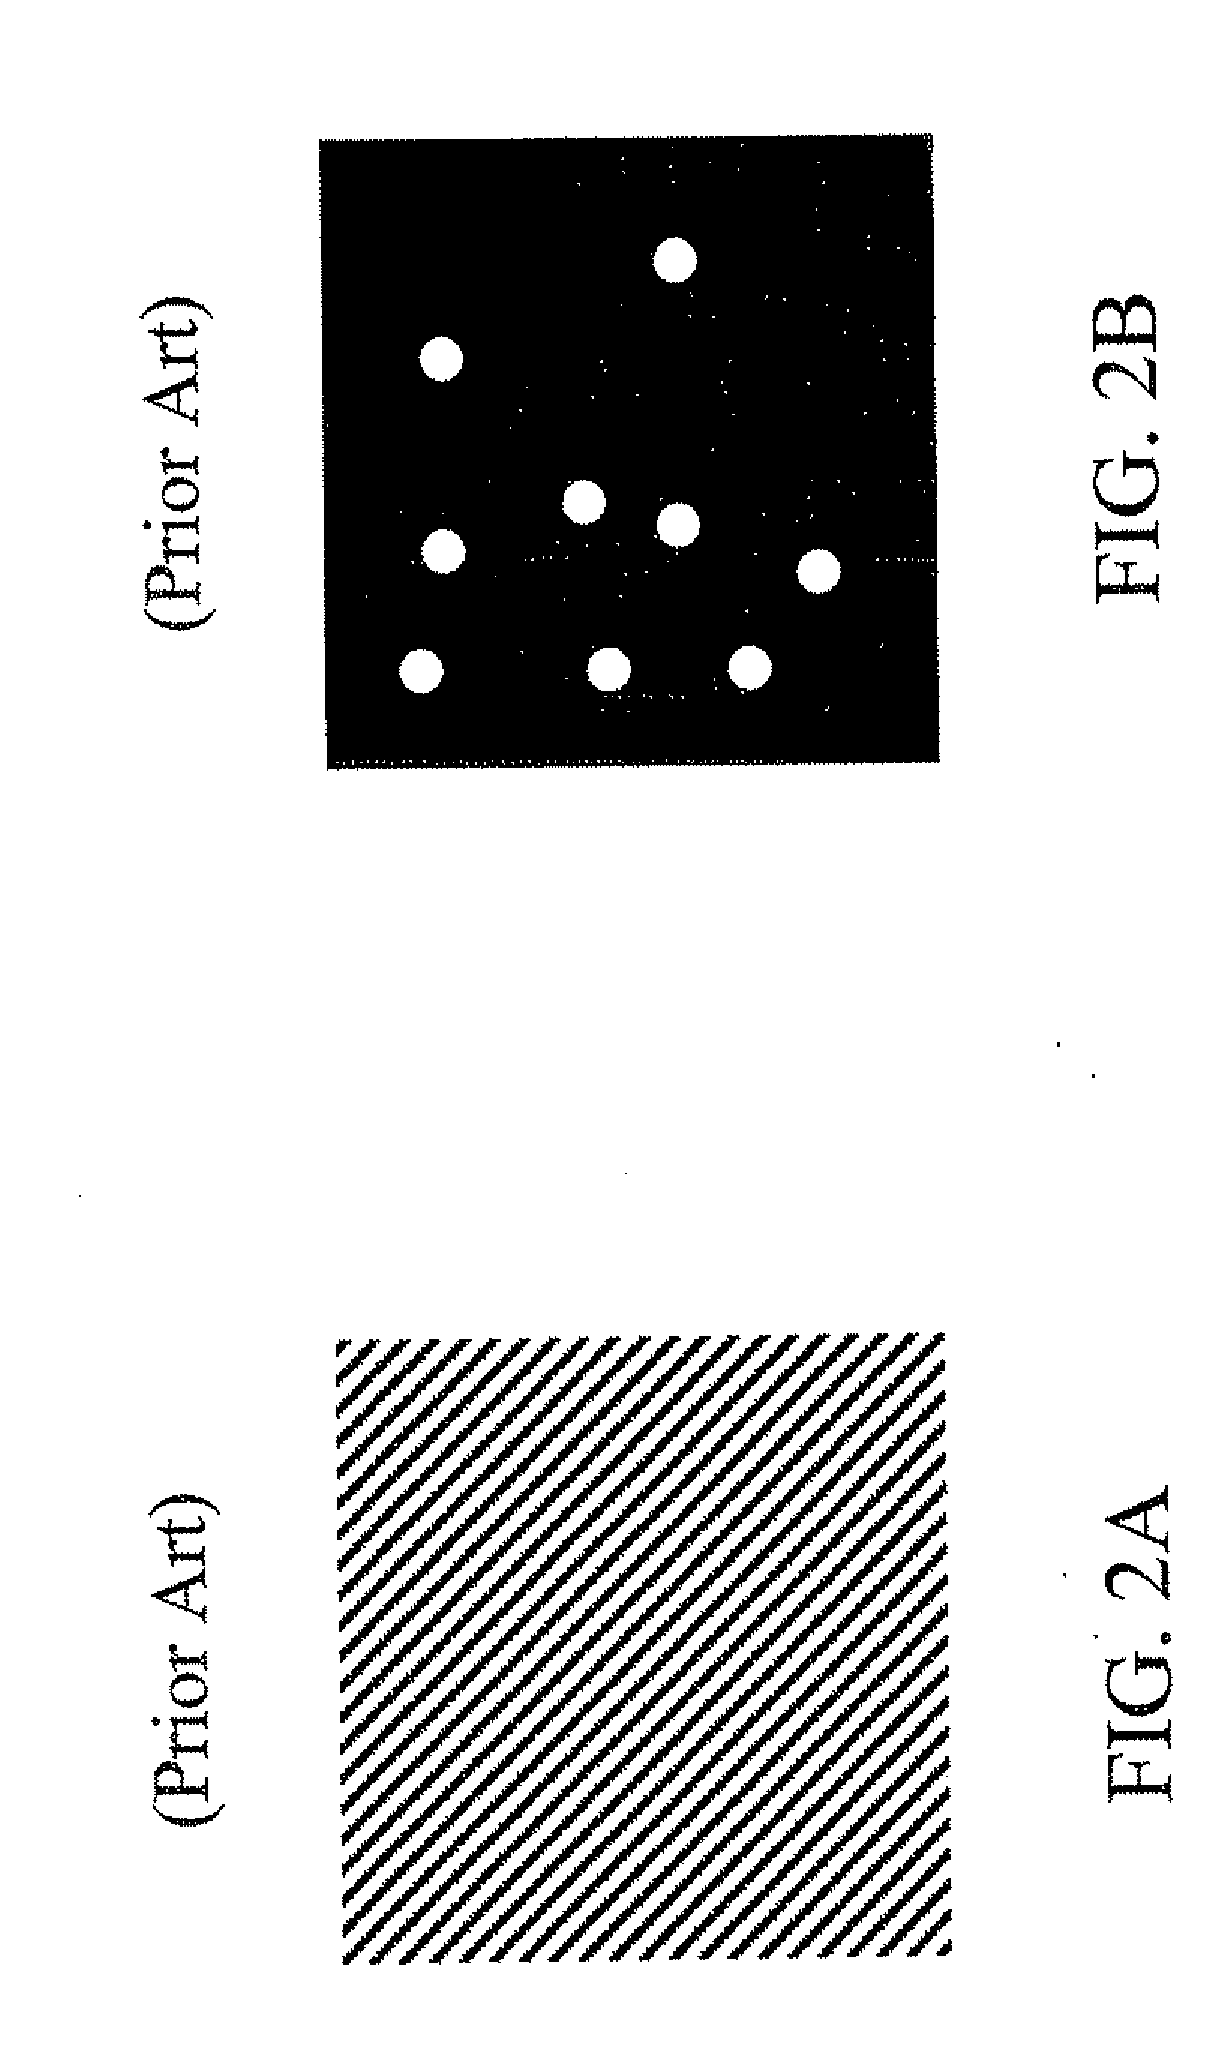 Packaging substrate having pattern-matched metal layers